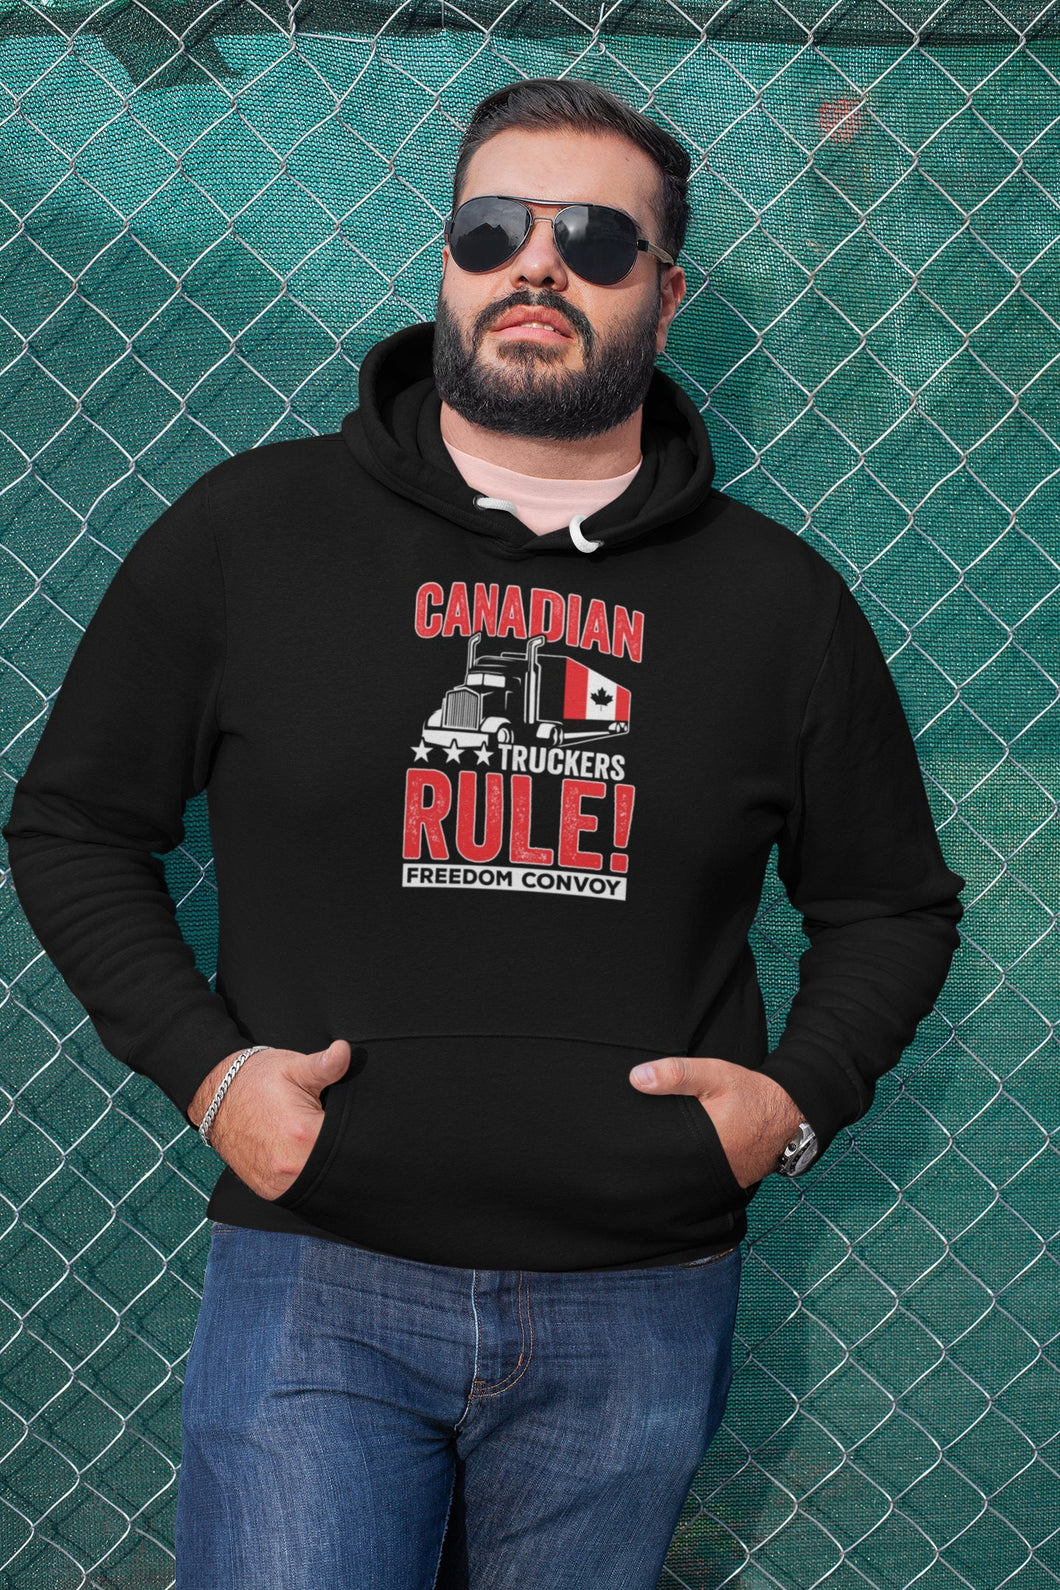 Canadian Truckers Rule Freedom Convoy Shirt, Support Truckers Shirt, Mandate Freedom Shirt